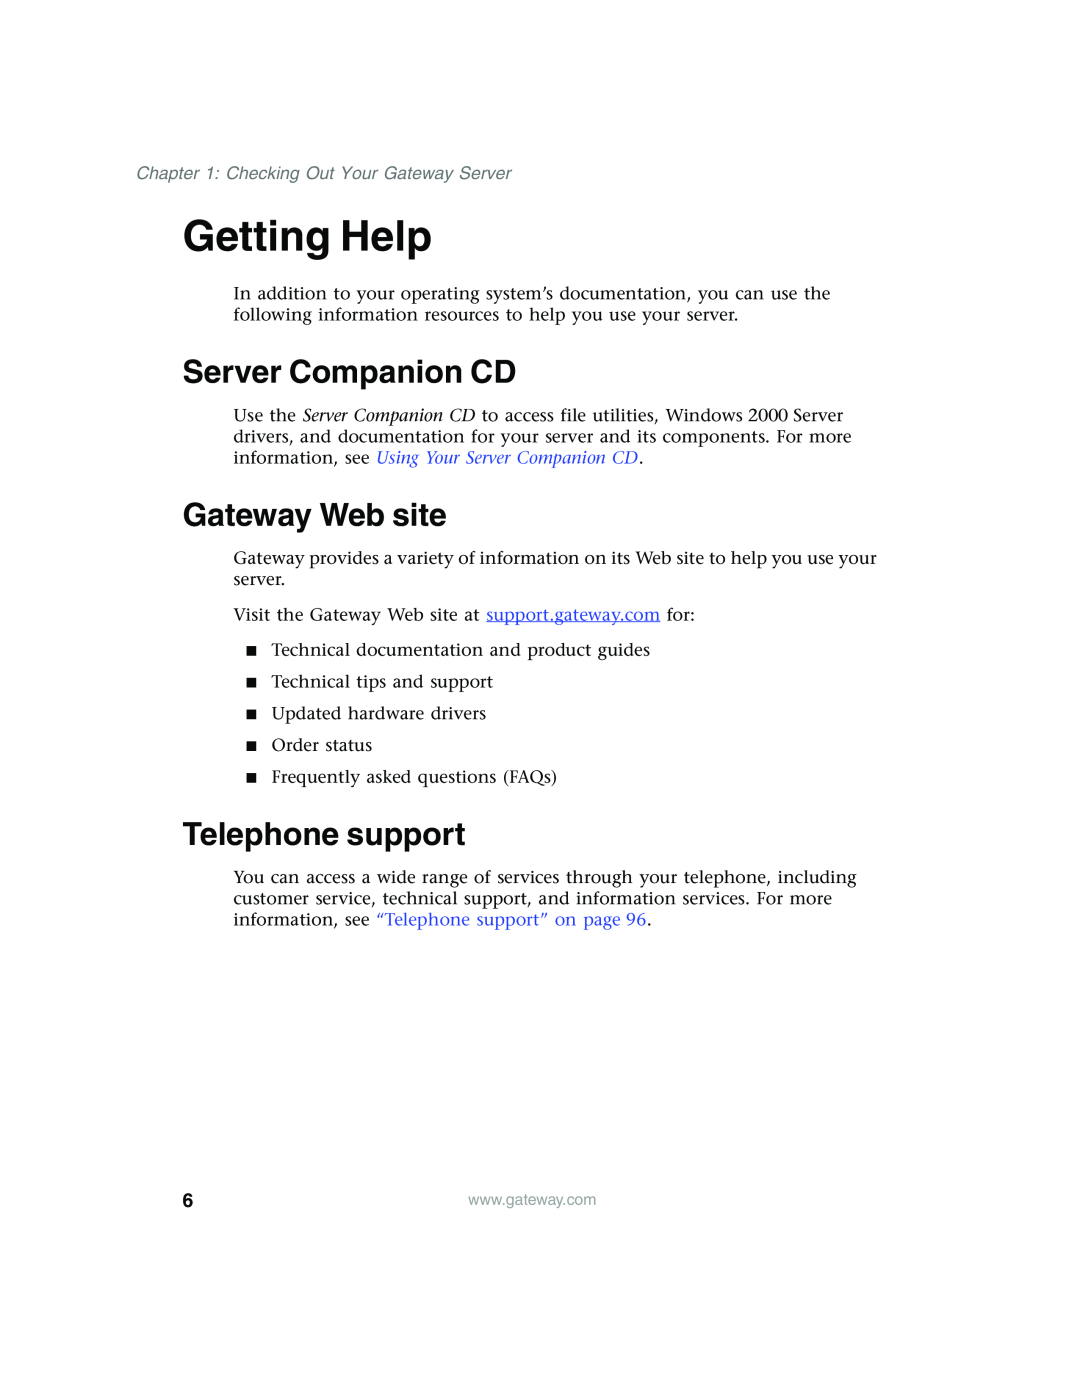 Gateway 955 manual Getting Help, Server Companion CD, Gateway Web site, Telephone support, Checking Out Your Gateway Server 